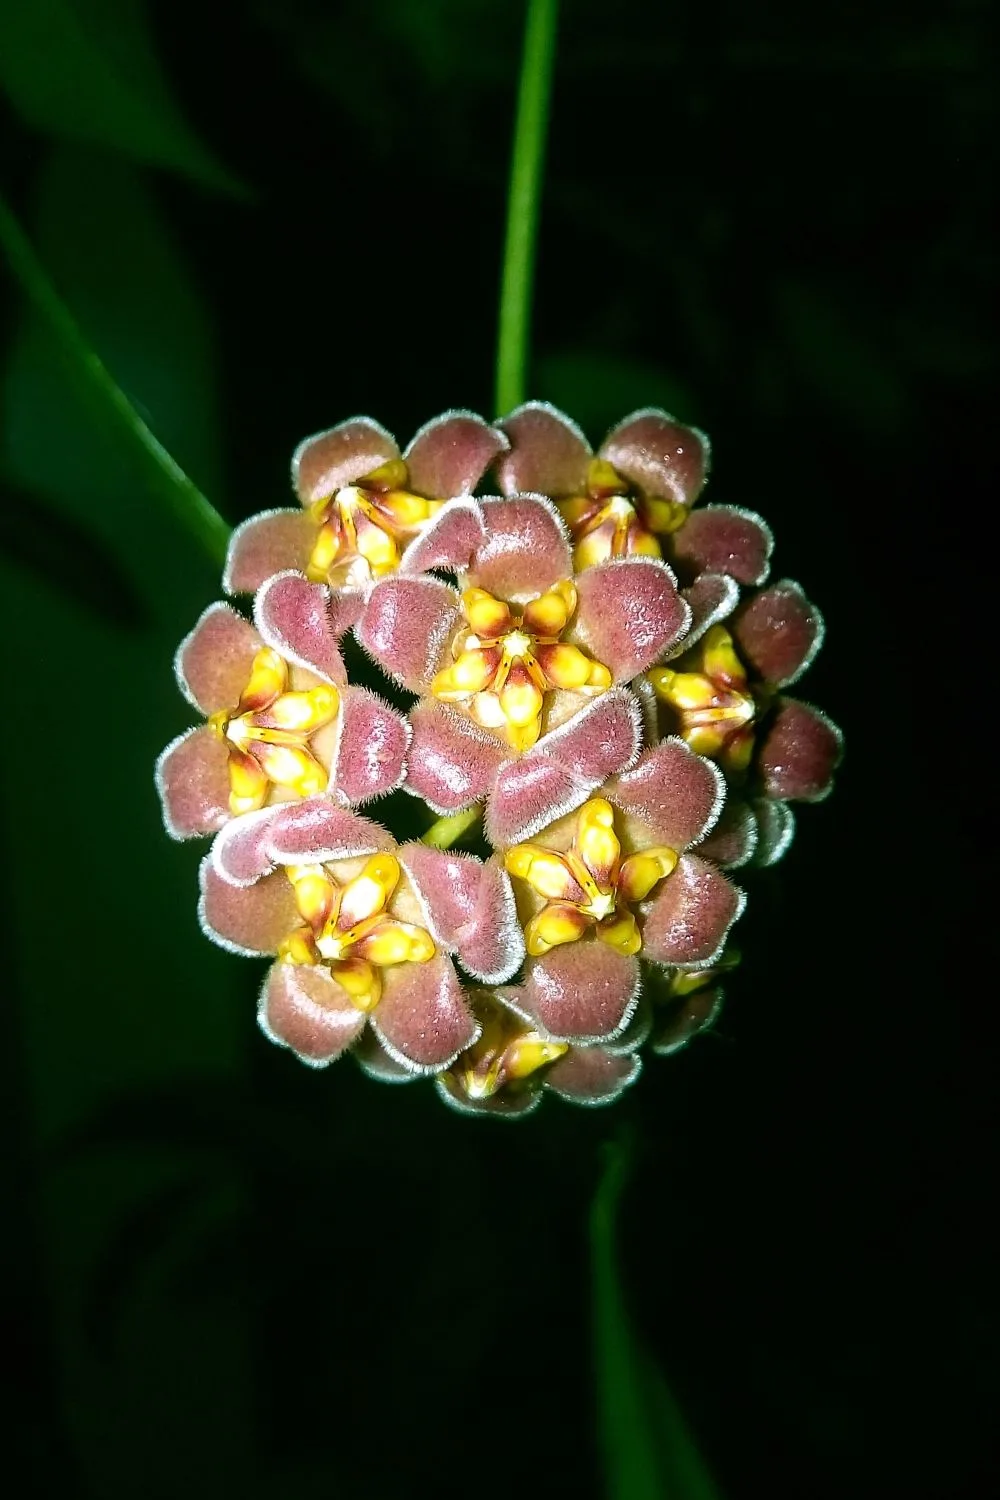 There are a few Hoya species that can survive in low light, but they'll never reach optimum growth